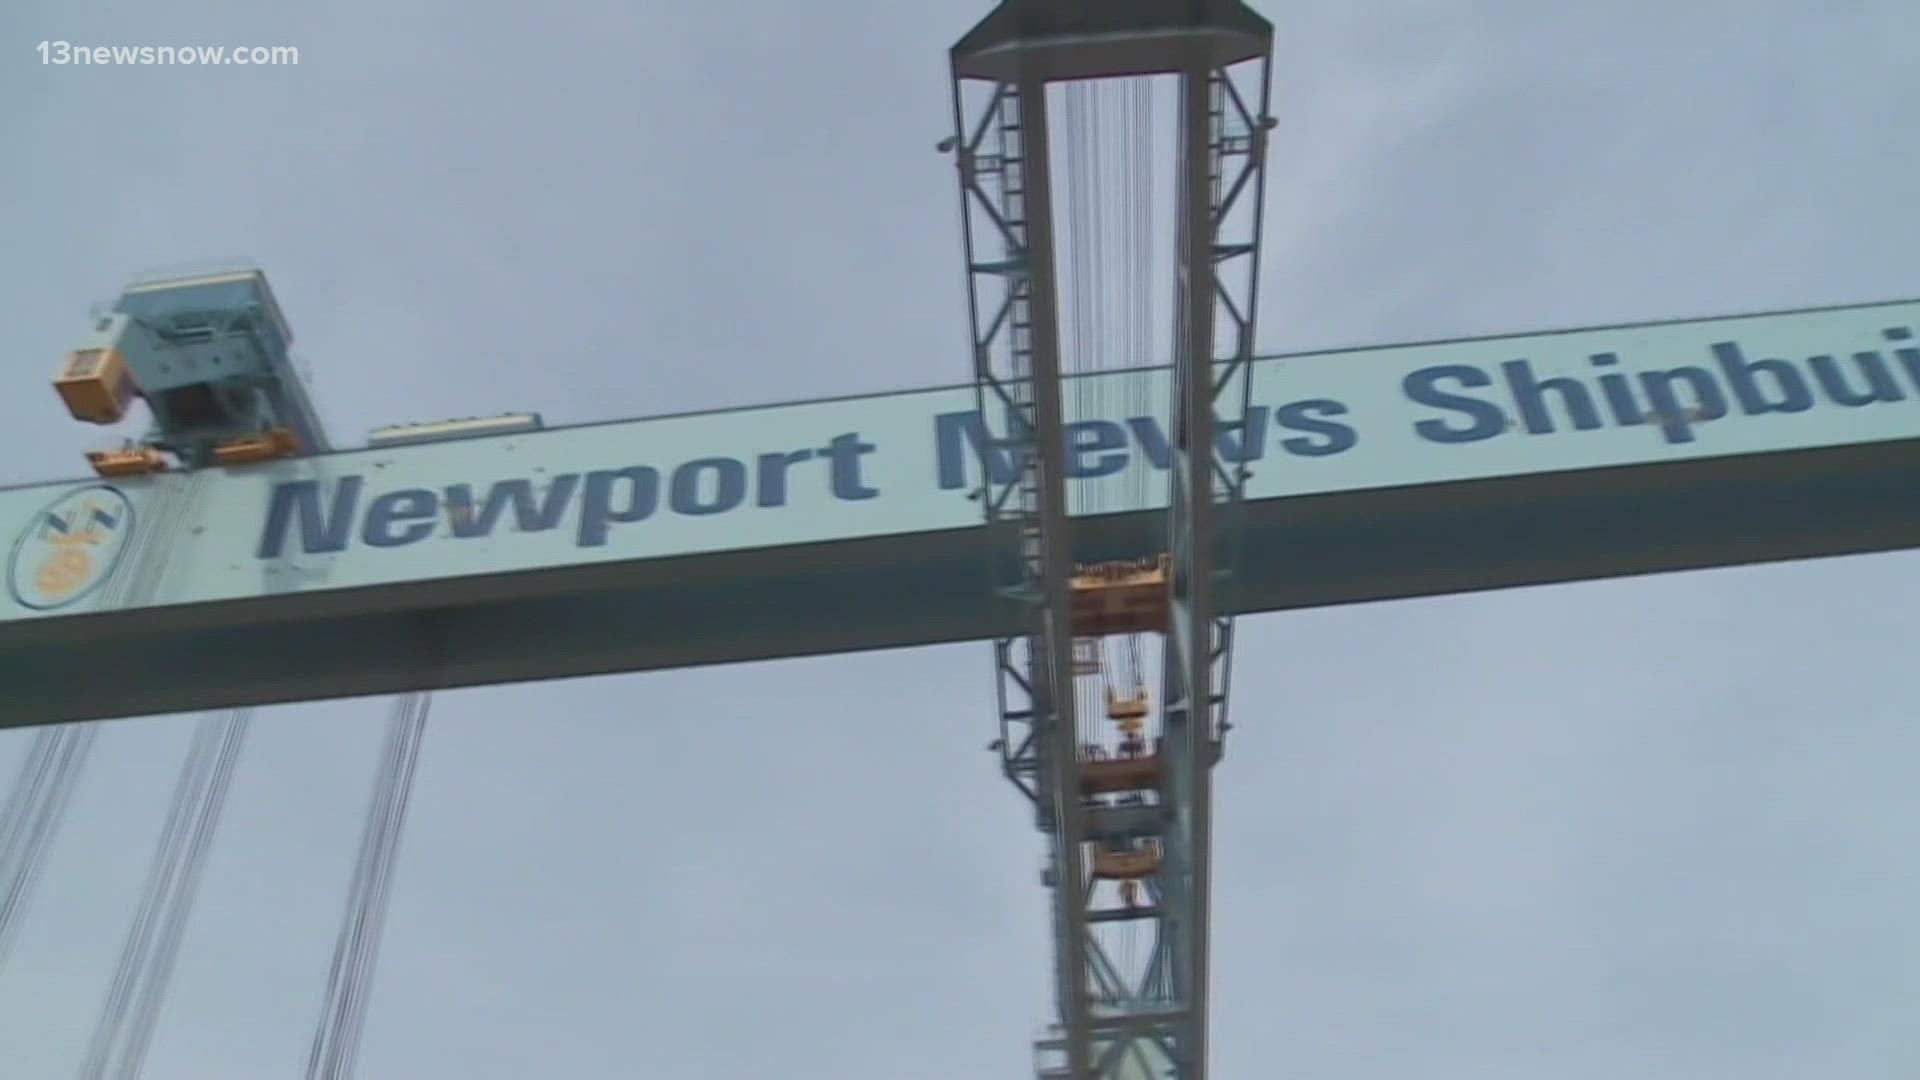 New benefits that will now cover over 10,000 workers at Newport News Shipbuilding.